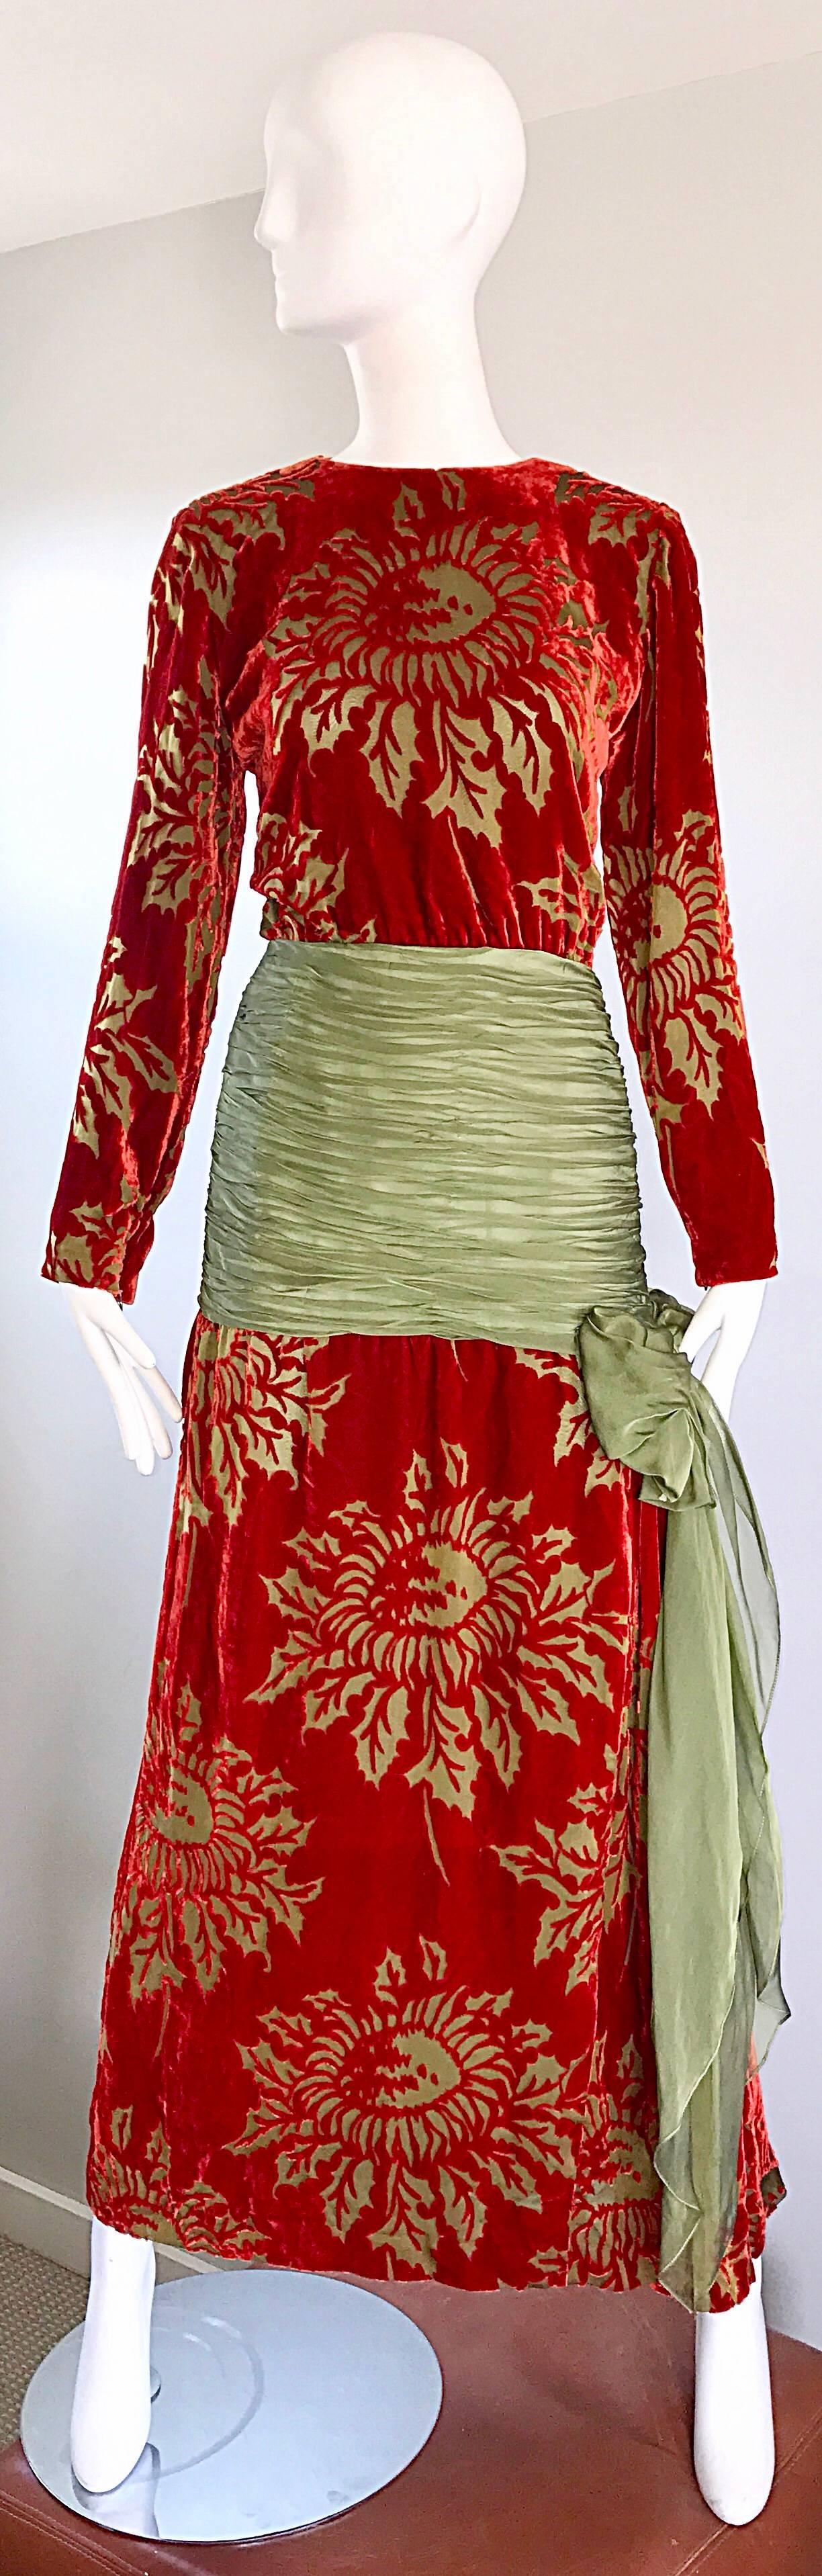 Gorgeous vintage JAMES GALANOS deep red and chartreuse green burn-out silk velvet 1920s style long sleeve evening dress! Gorgeous deep red color with chartreuse cut-outs in shapes of flowers. Drop waist features flattering ruched chartreuse chiffon,